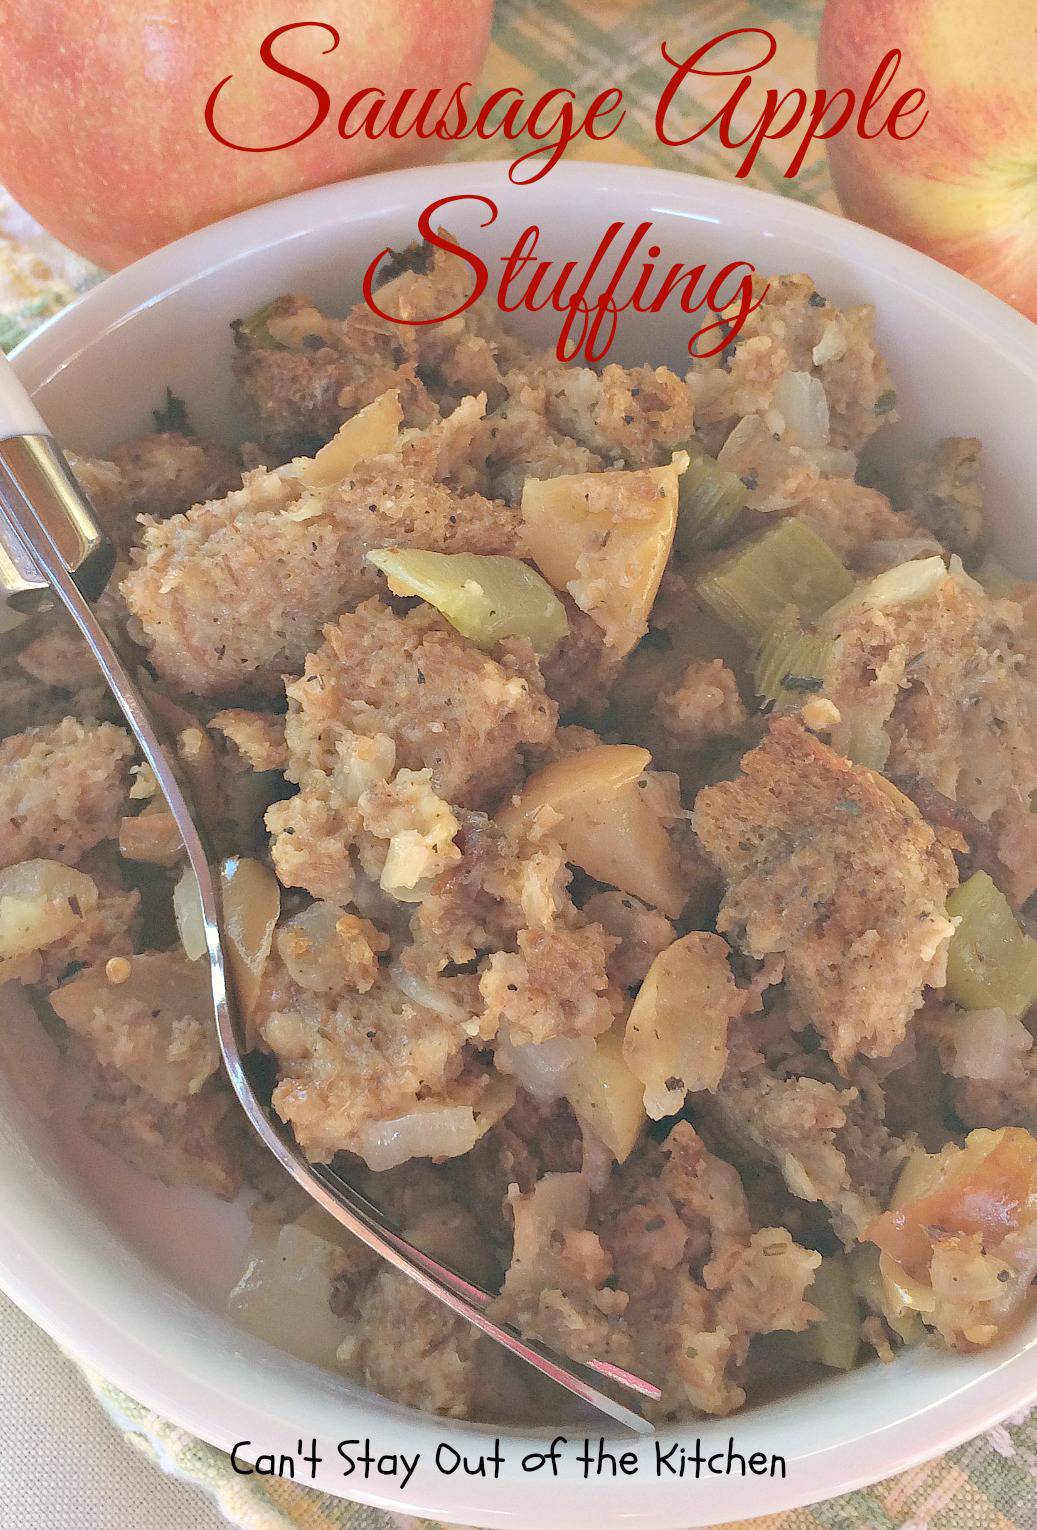 Sausage Apple Stuffing - Can't Stay Out of the Kitchen